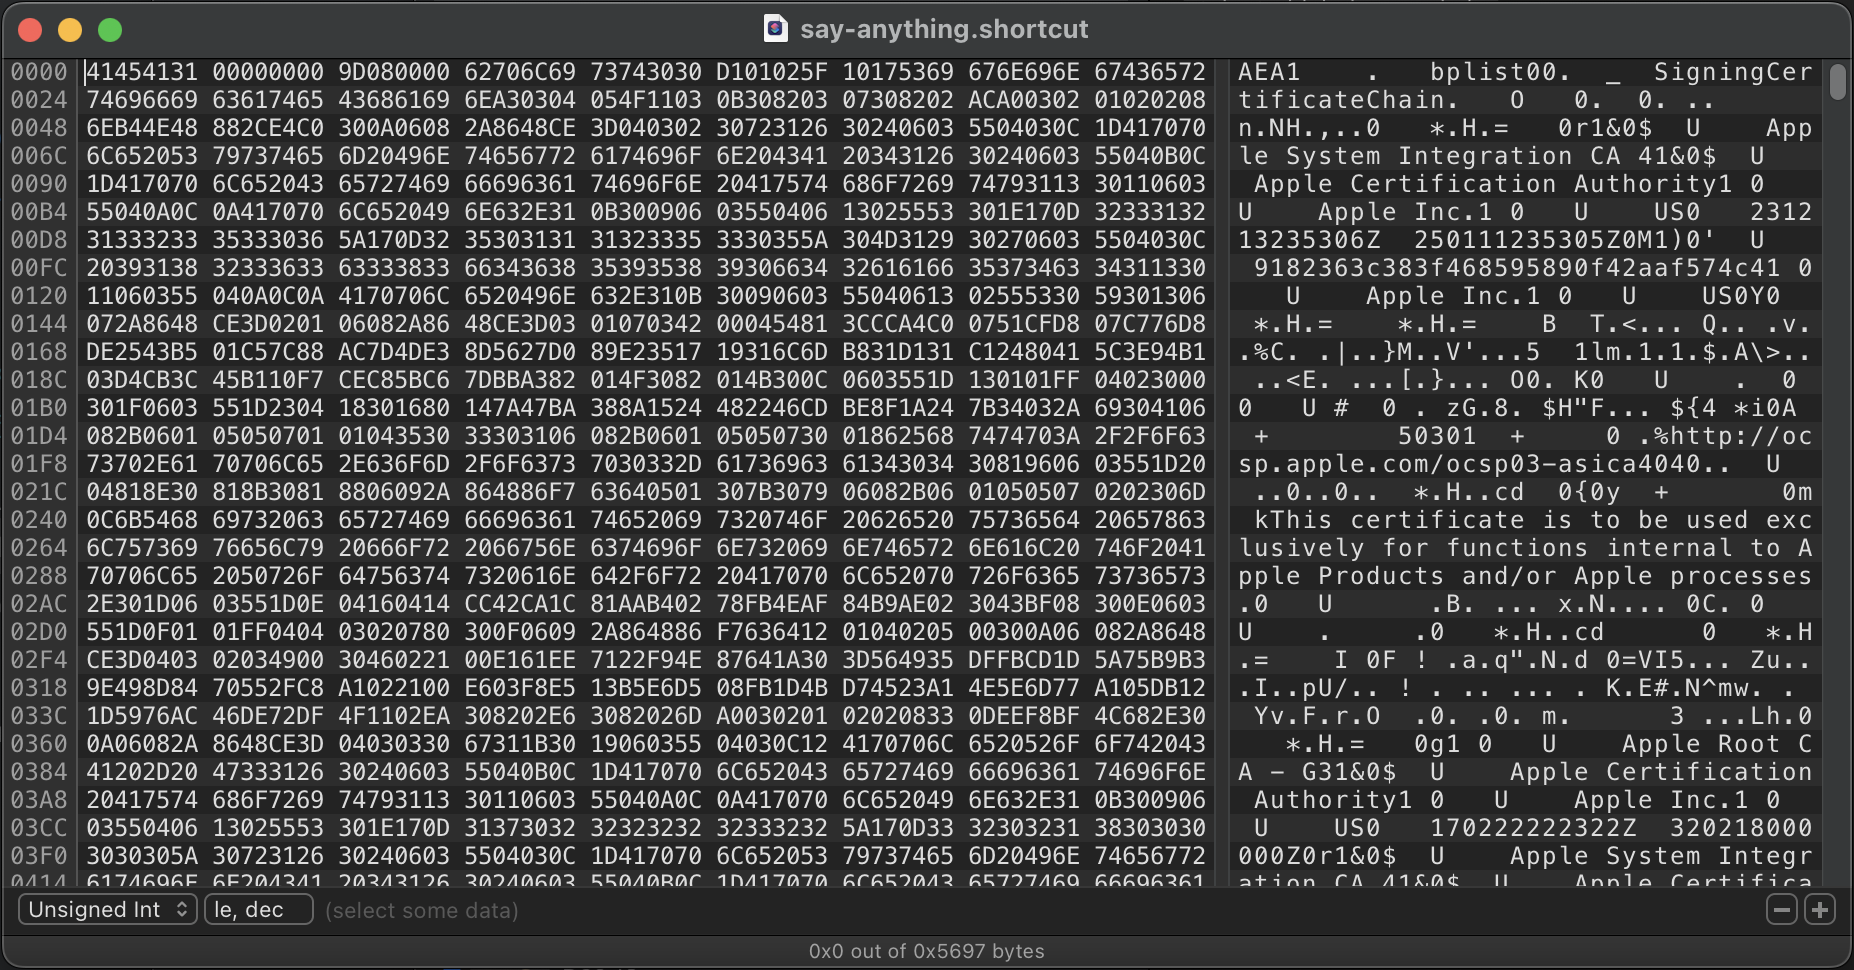 A screenshot of our shortcut in the Hex Fiend hex editor, at the start of the file. Strings are clearly present that indicate the presence of X.509 certificates.